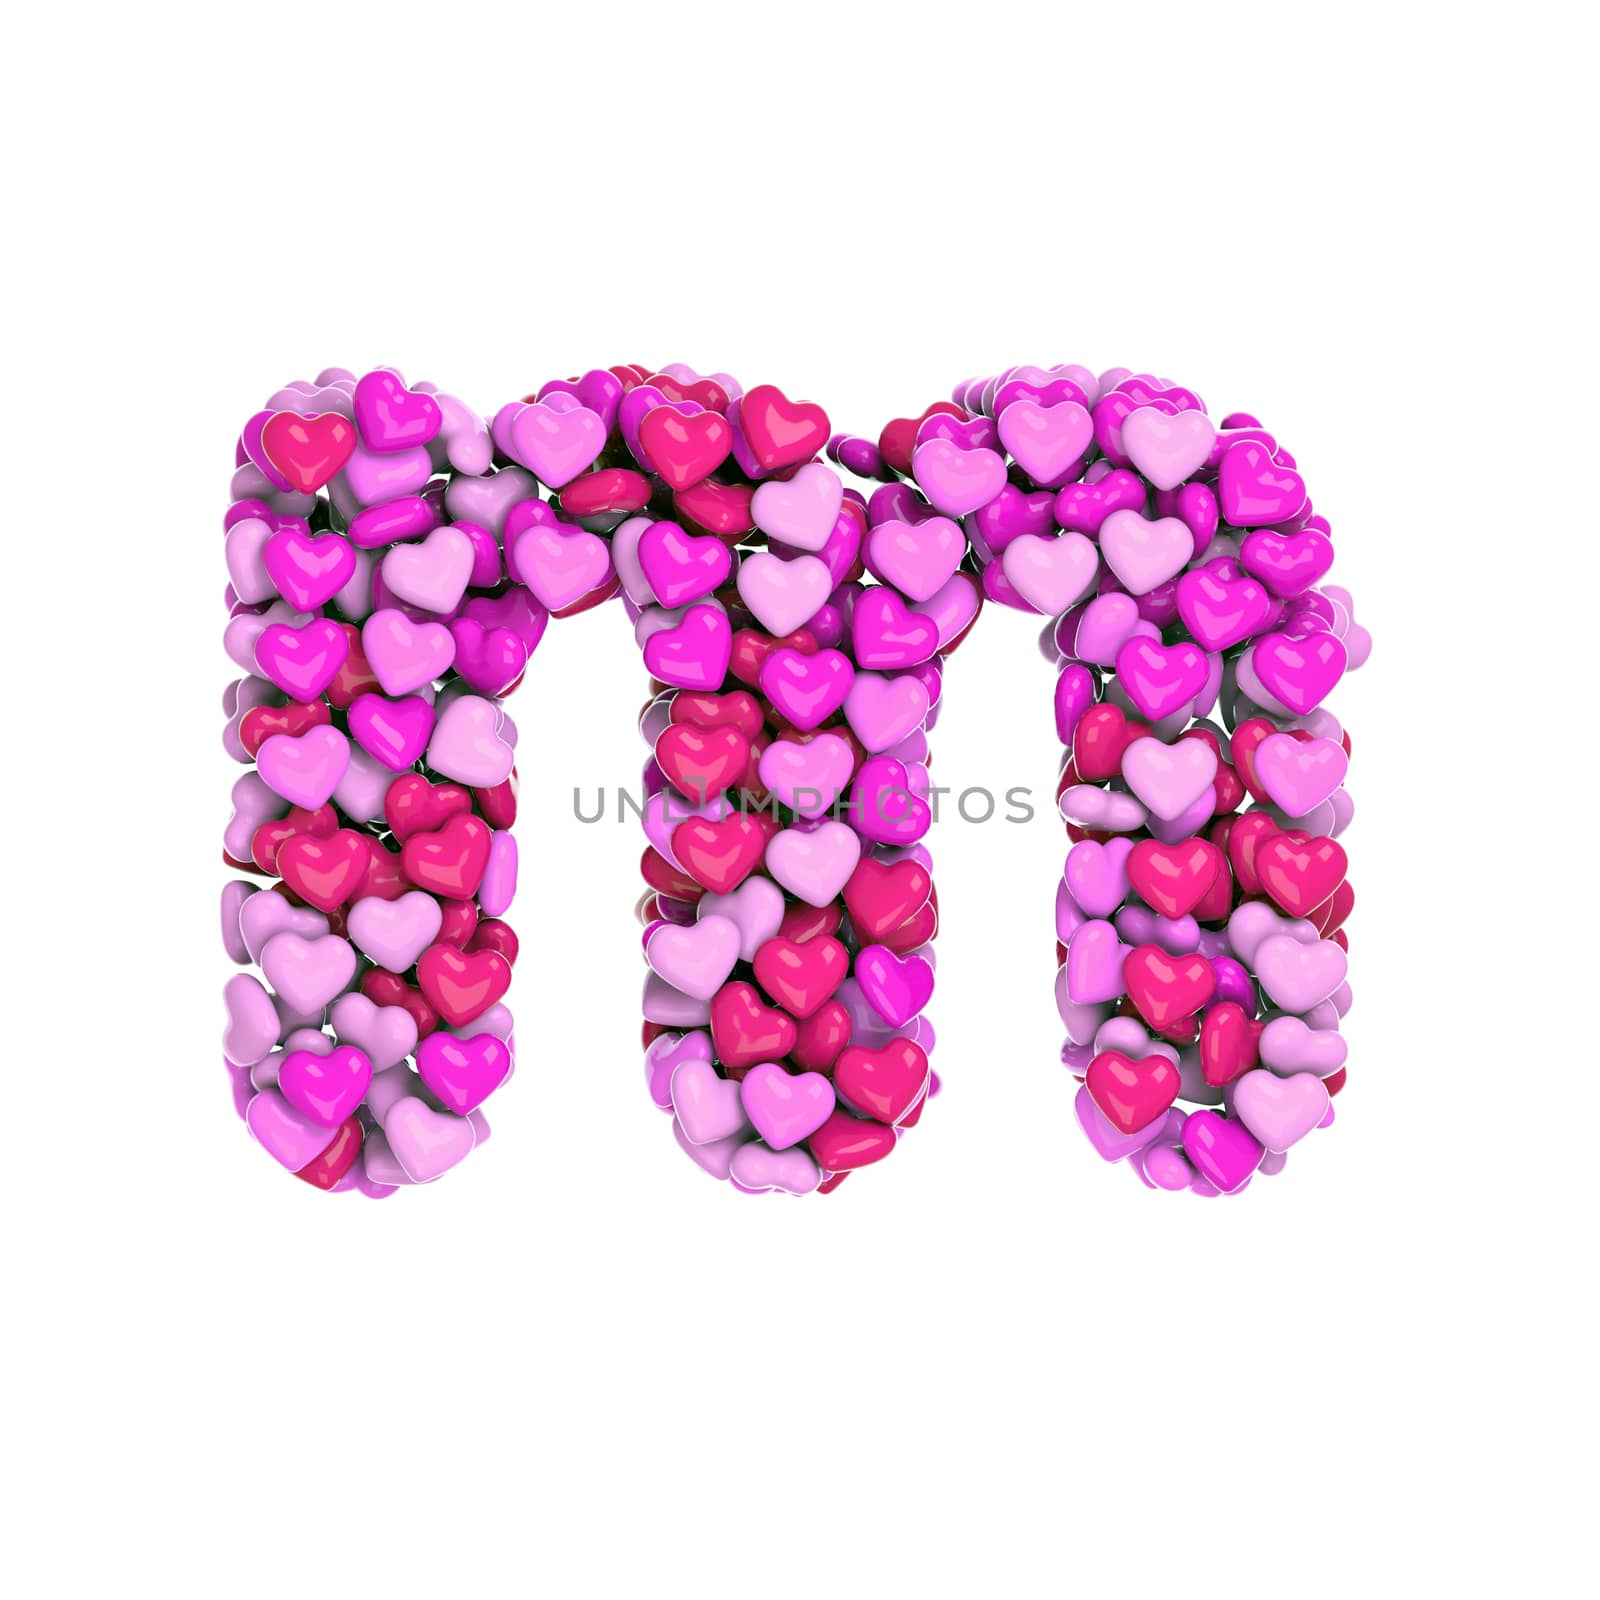 Valentine letter M - Small 3d pink hearts font isolated on white background. This alphabet is perfect for creative illustrations related but not limited to Love, passion, wedding...